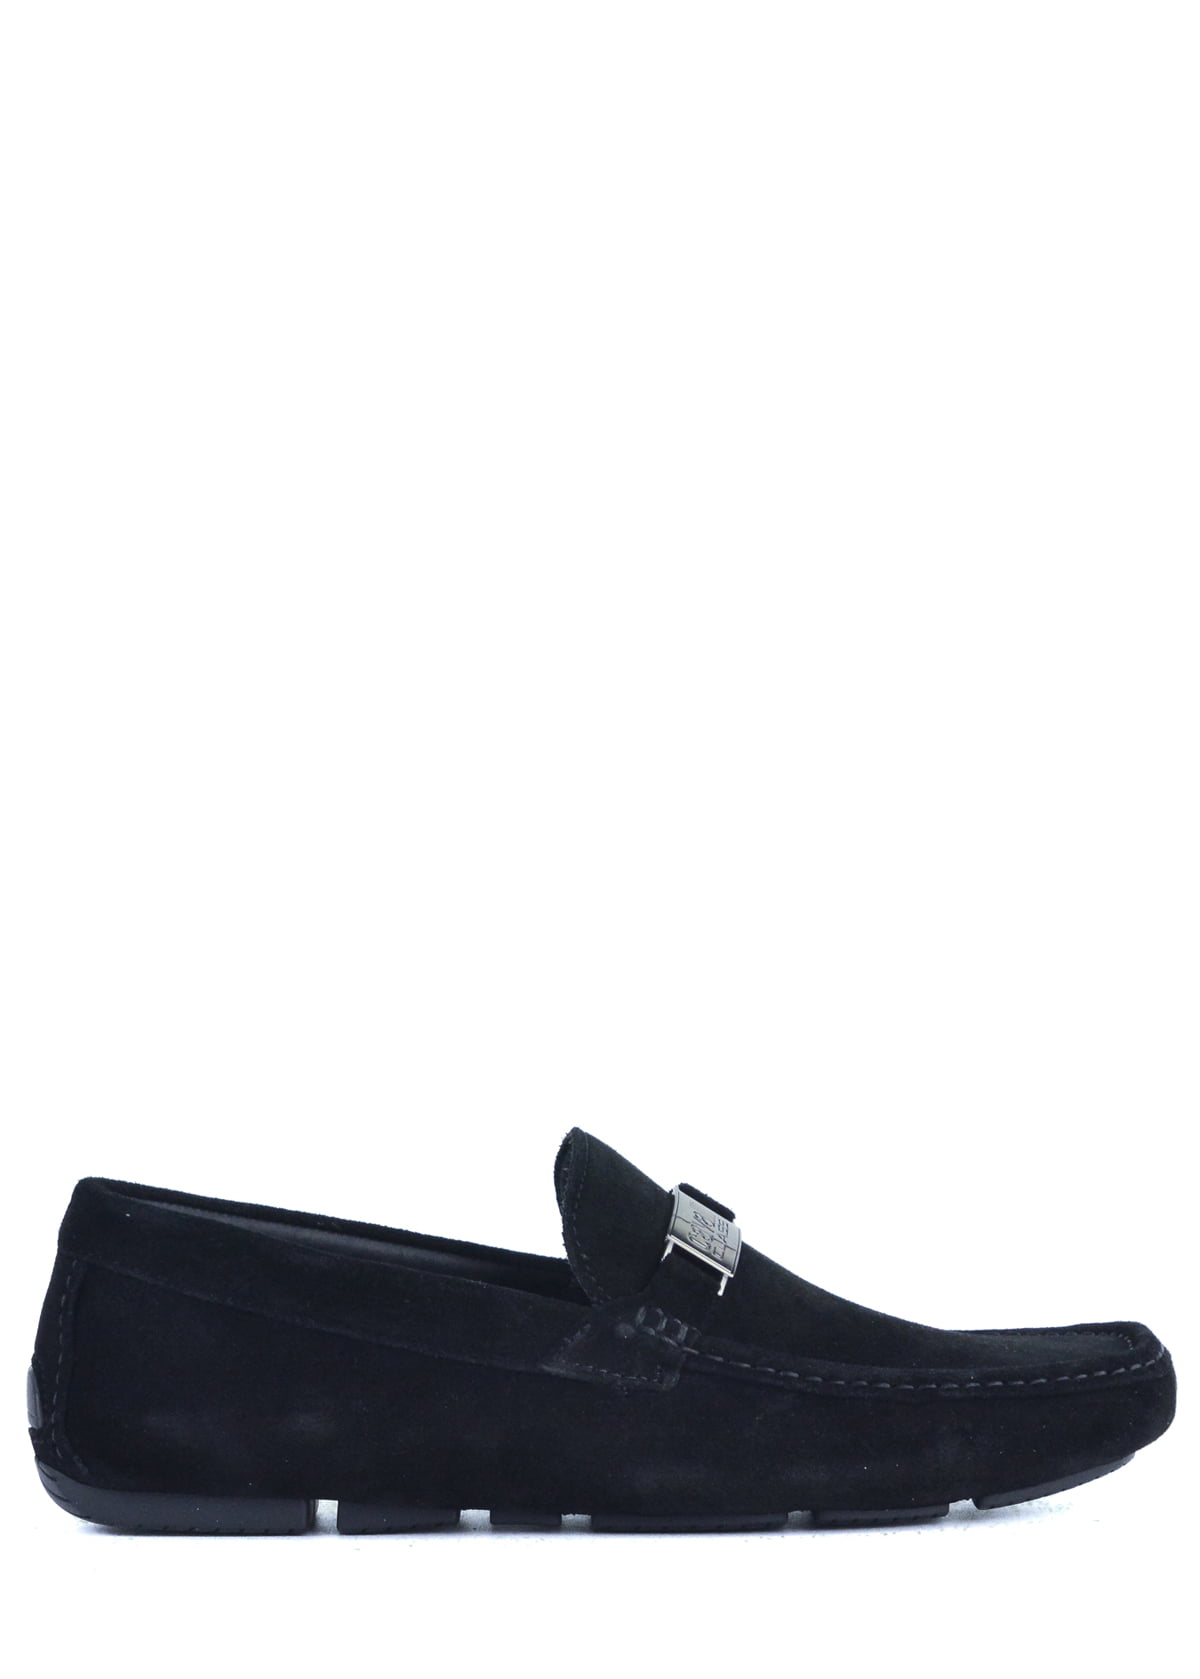 Blue Class Roberto Cavalli Leather Loafer in Dark Blue Mens Shoes Slip-on shoes Loafers for Men 